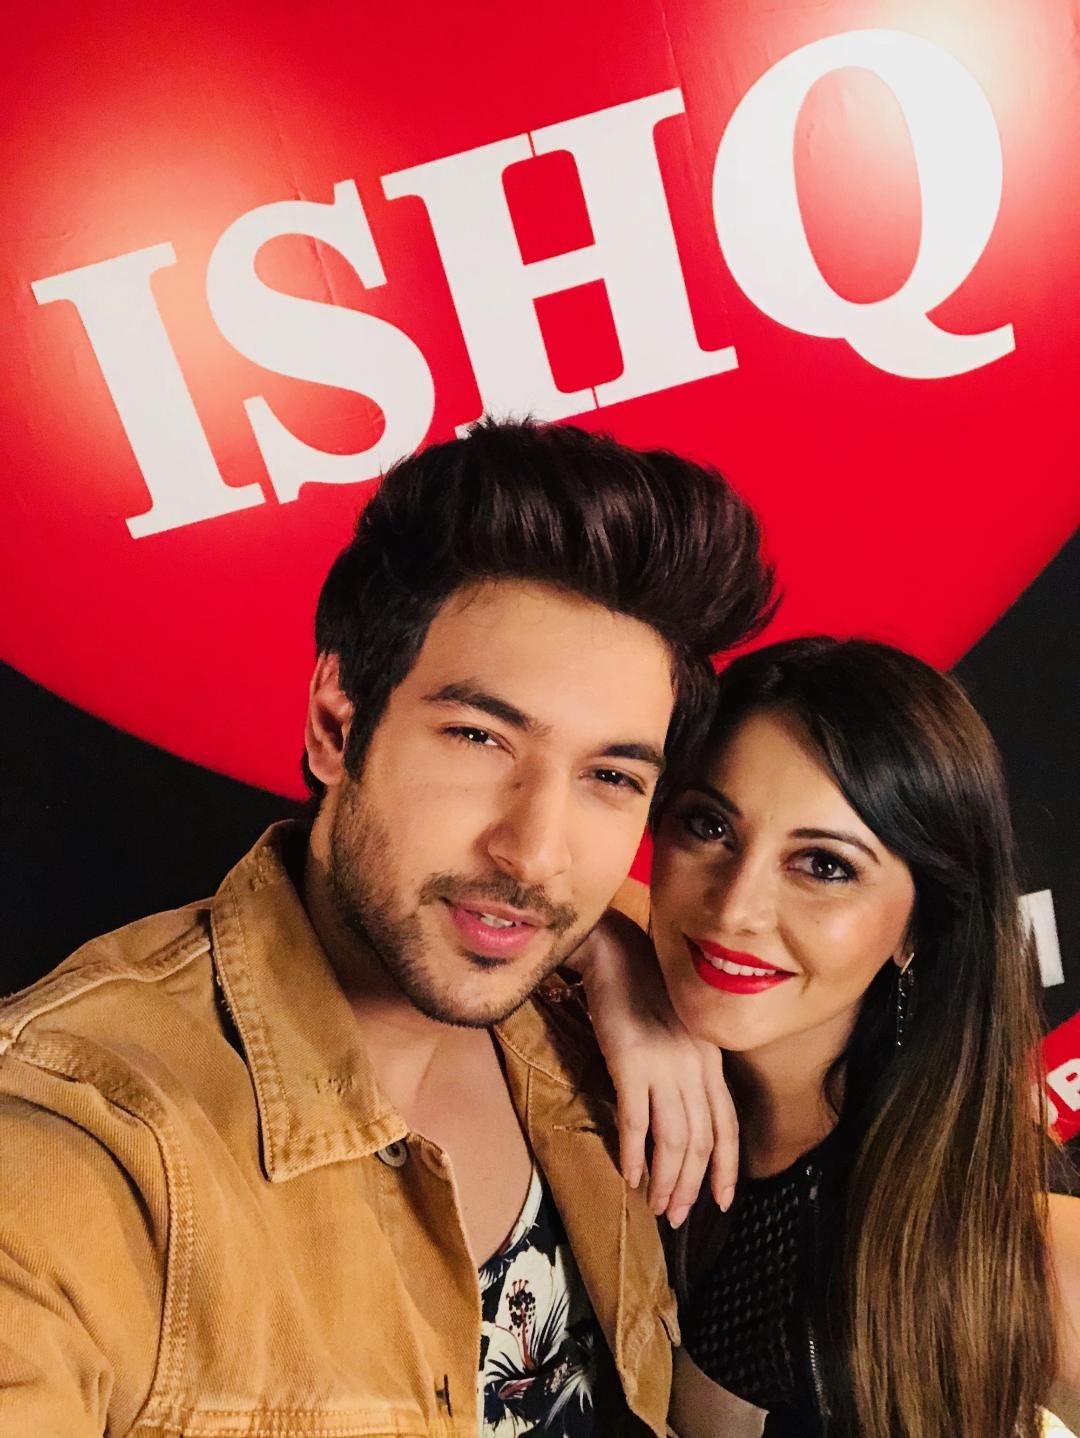 Minissha Is Really A Very Happy Person To Work With; Says Co-Star Shivin Narang